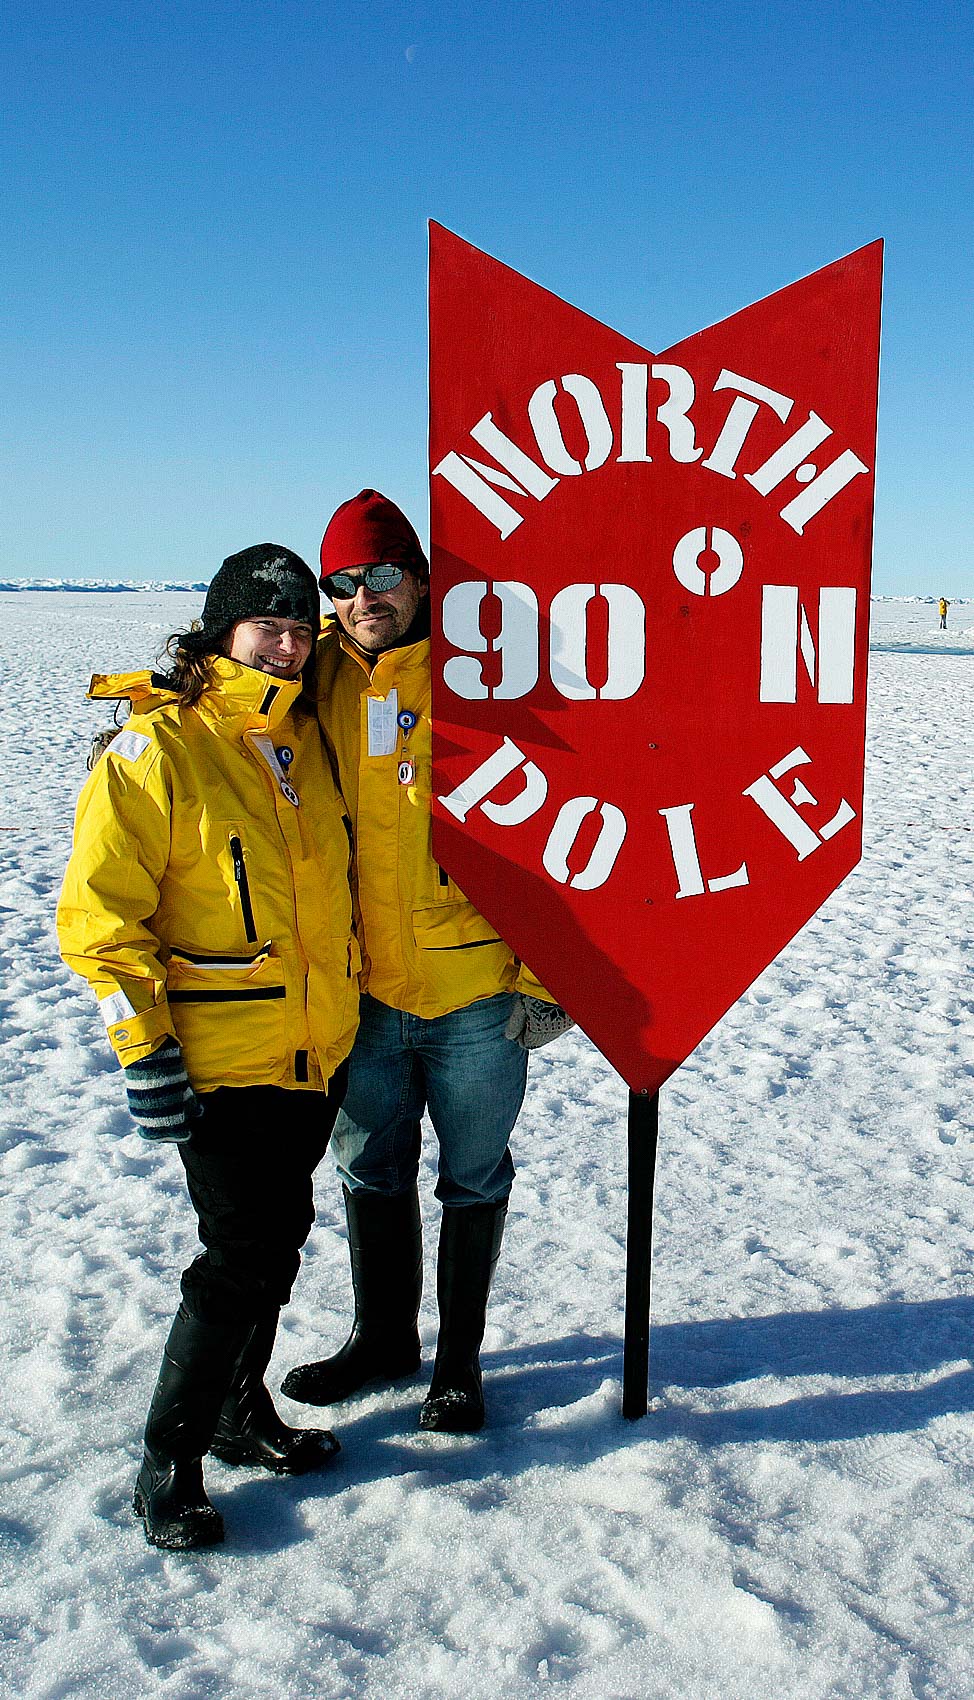 A couple in the North Pole.